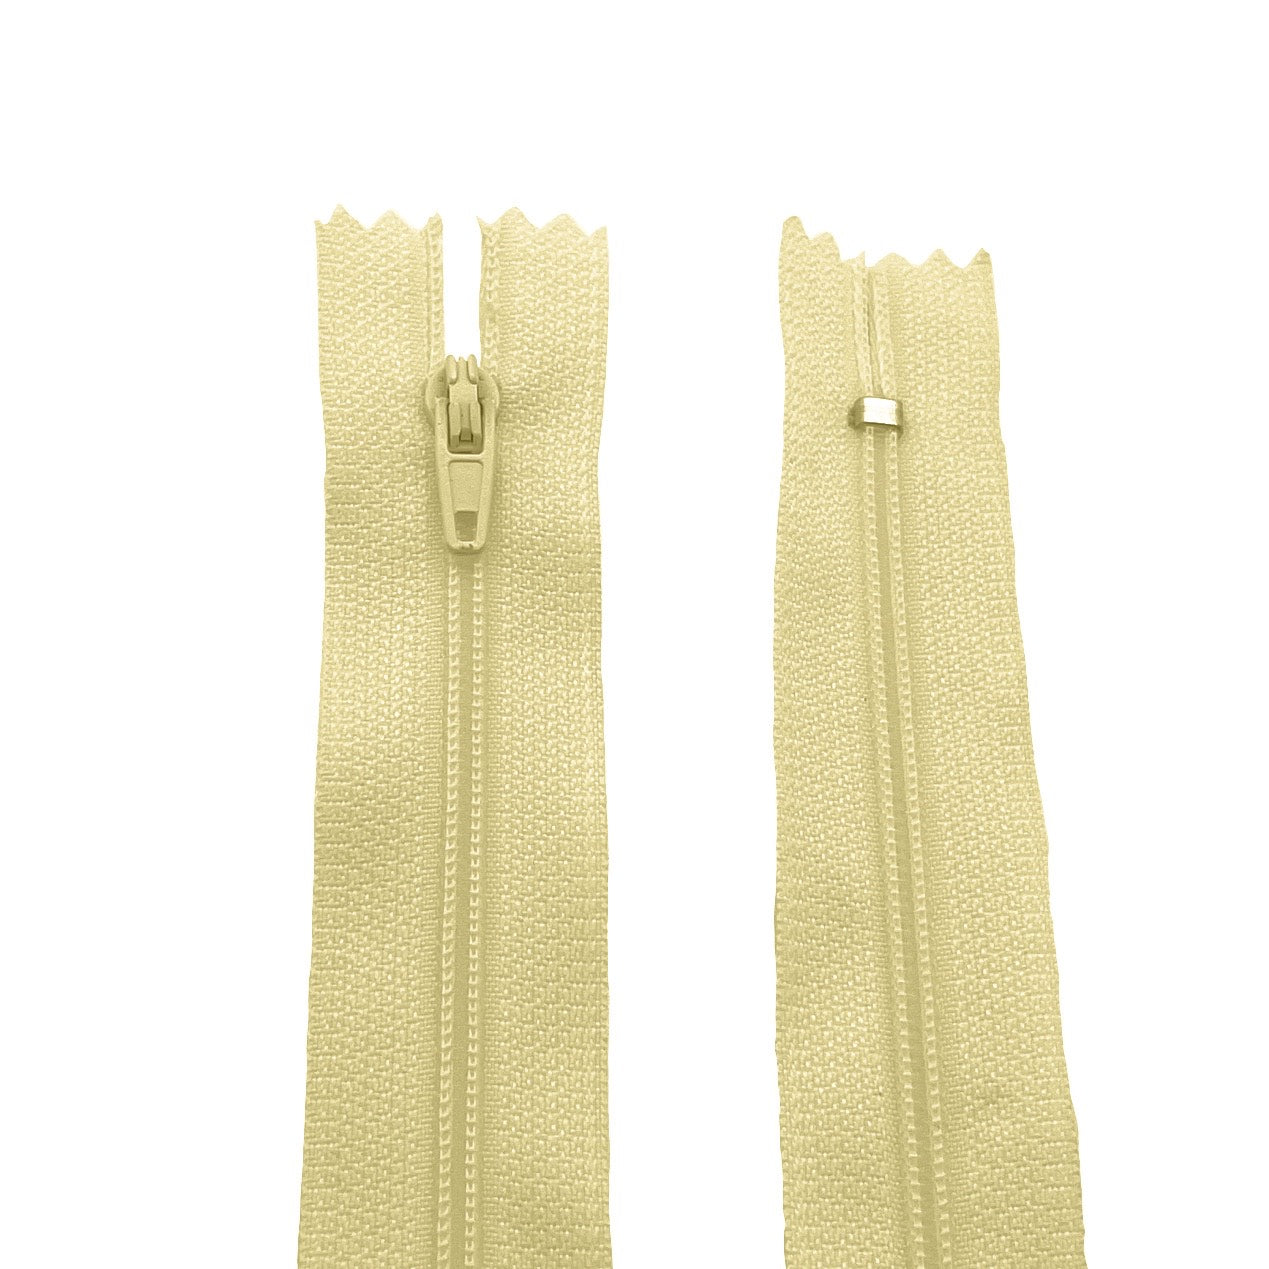 Photo of cream nylon zips available in 25 colors and 5 sizes. Excellent quality zippers for craft and dressmaking purposes. Perfect for dresses, skirts, trousers, bags, purses, cushions, and numerous other projects. So many possibilities, so little time!